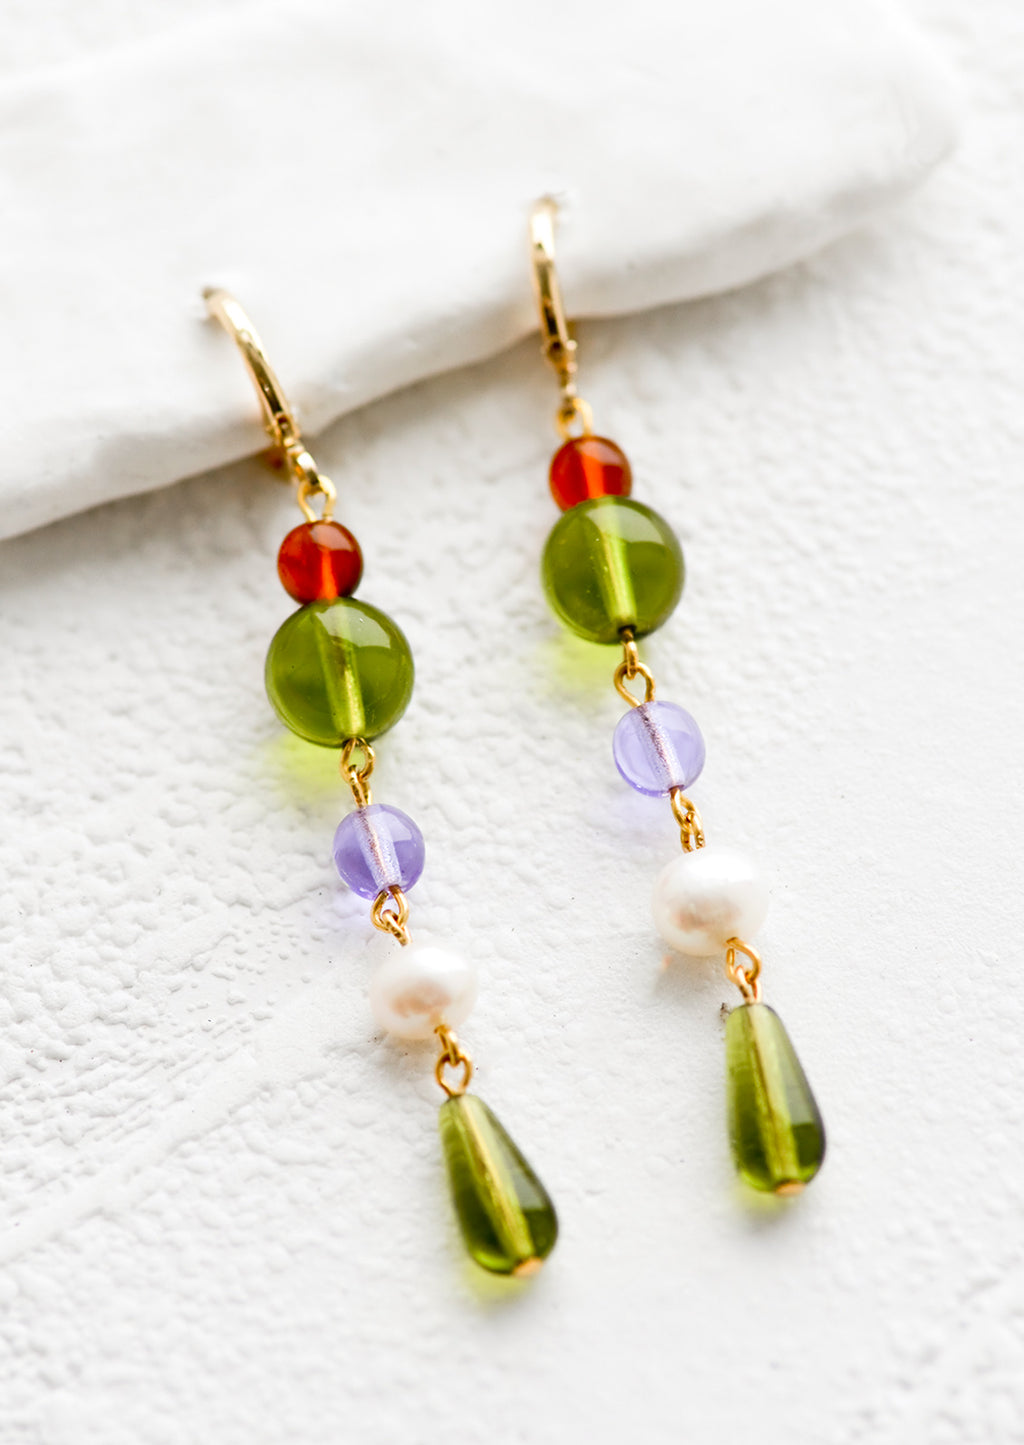 Green Multi: A pair of drop earrings with a beaded strand of colored glass beads with pearl detailing.